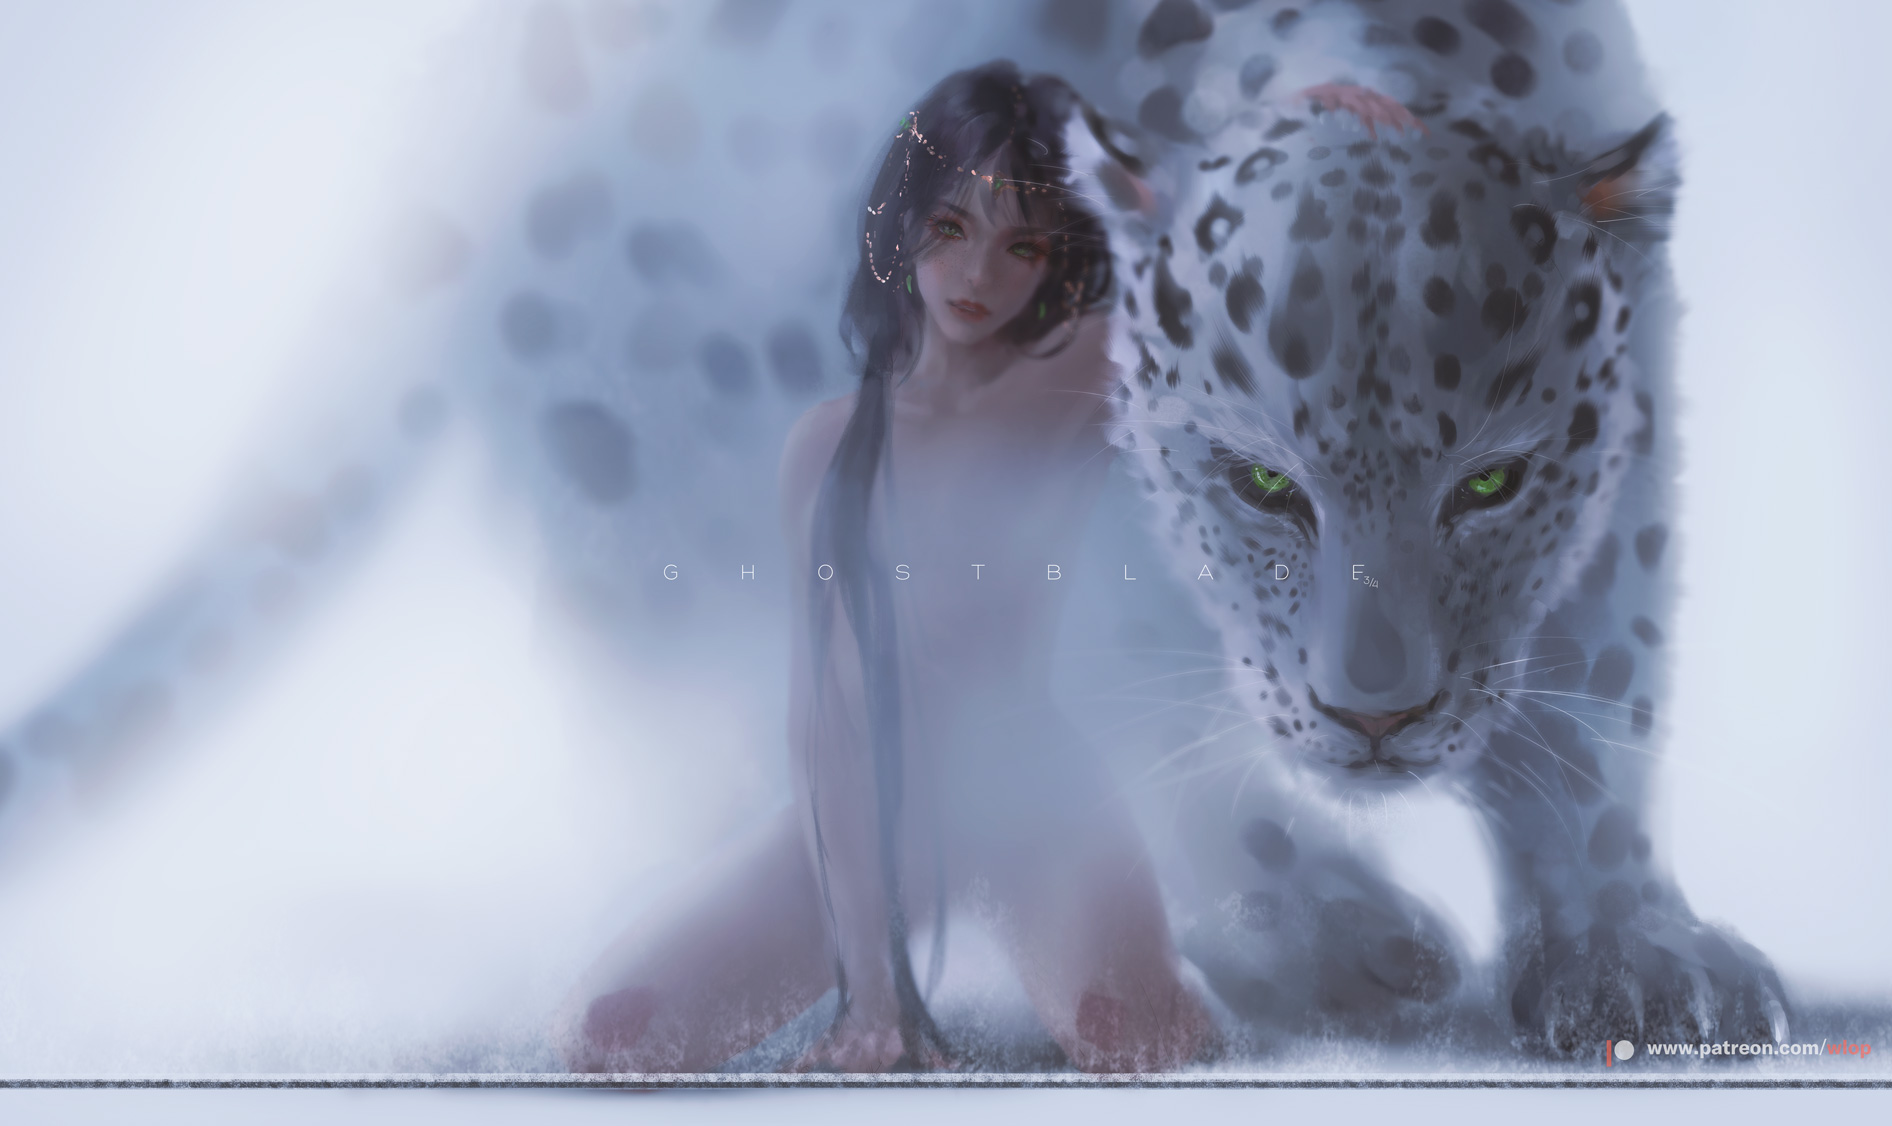 Im drawing xenoblade 1 characters as animals. Day 1 of this challenge,  Alvis as a snow leopard : r/Xenoblade_Chronicles